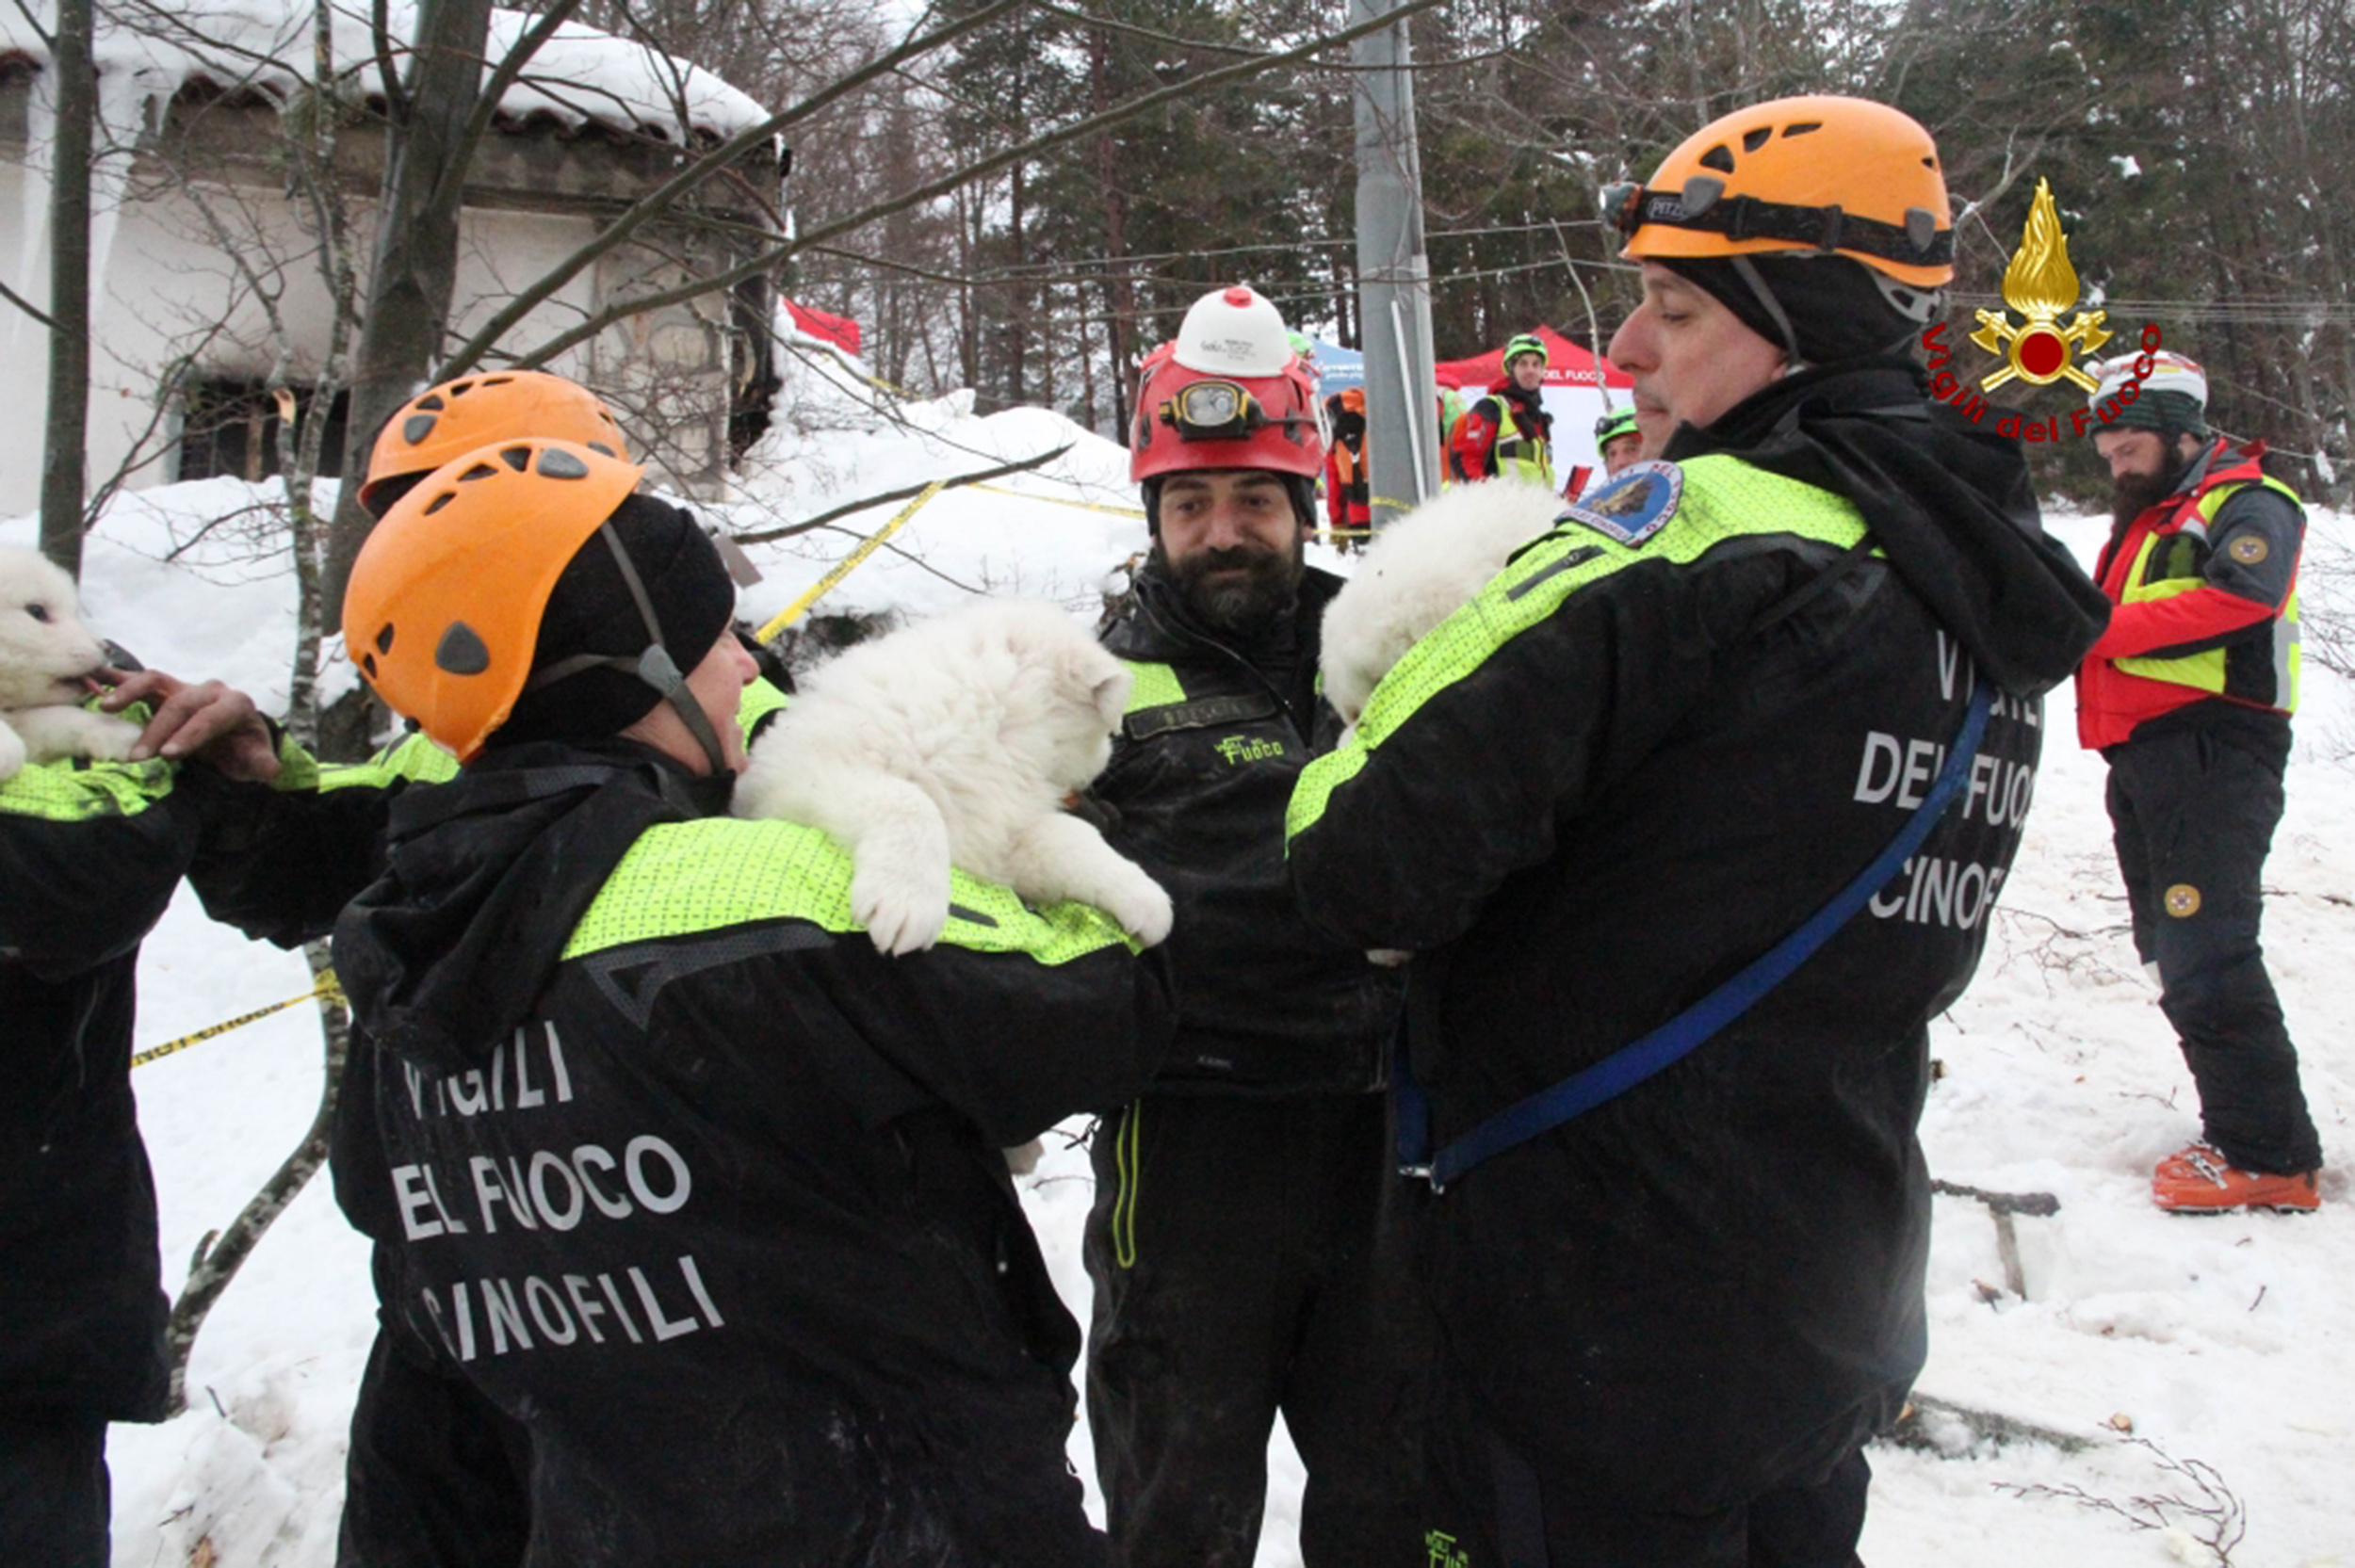 A handout picture released on January 23, 2017 by the Italian Firemen "Vigili del Fuoco" shows firemen carrying puppies found at the avalanche-hit Hotel Rigopiano, near the village of Farindola, on the eastern lower slopes of the Gran Sasso mountain. Fireman Fabio Jerman said three puppies had been found alive today in one of the air pockets under the rubble, which he said was "an important sign of life which gives us hope". Italian rescuers pulled nine survivors from the hotel hit by an avalanche on January 18, 2016 and continue to search the 23 people still trapped under the ruins. A sixth victim was pulled out of the rubble and snow yesterday. / AFP PHOTO / AFP PHOTO AND Vigili del Fuoco / Fabio GATTO / RESTRICTED TO EDITORIAL USE - MANDATORY CREDIT "AFP PHOTO / VIGILI DEL FUOCO " - NO MARKETING NO ADVERTISING CAMPAIGNS - DISTRIBUTED AS A SERVICE TO CLIENTS